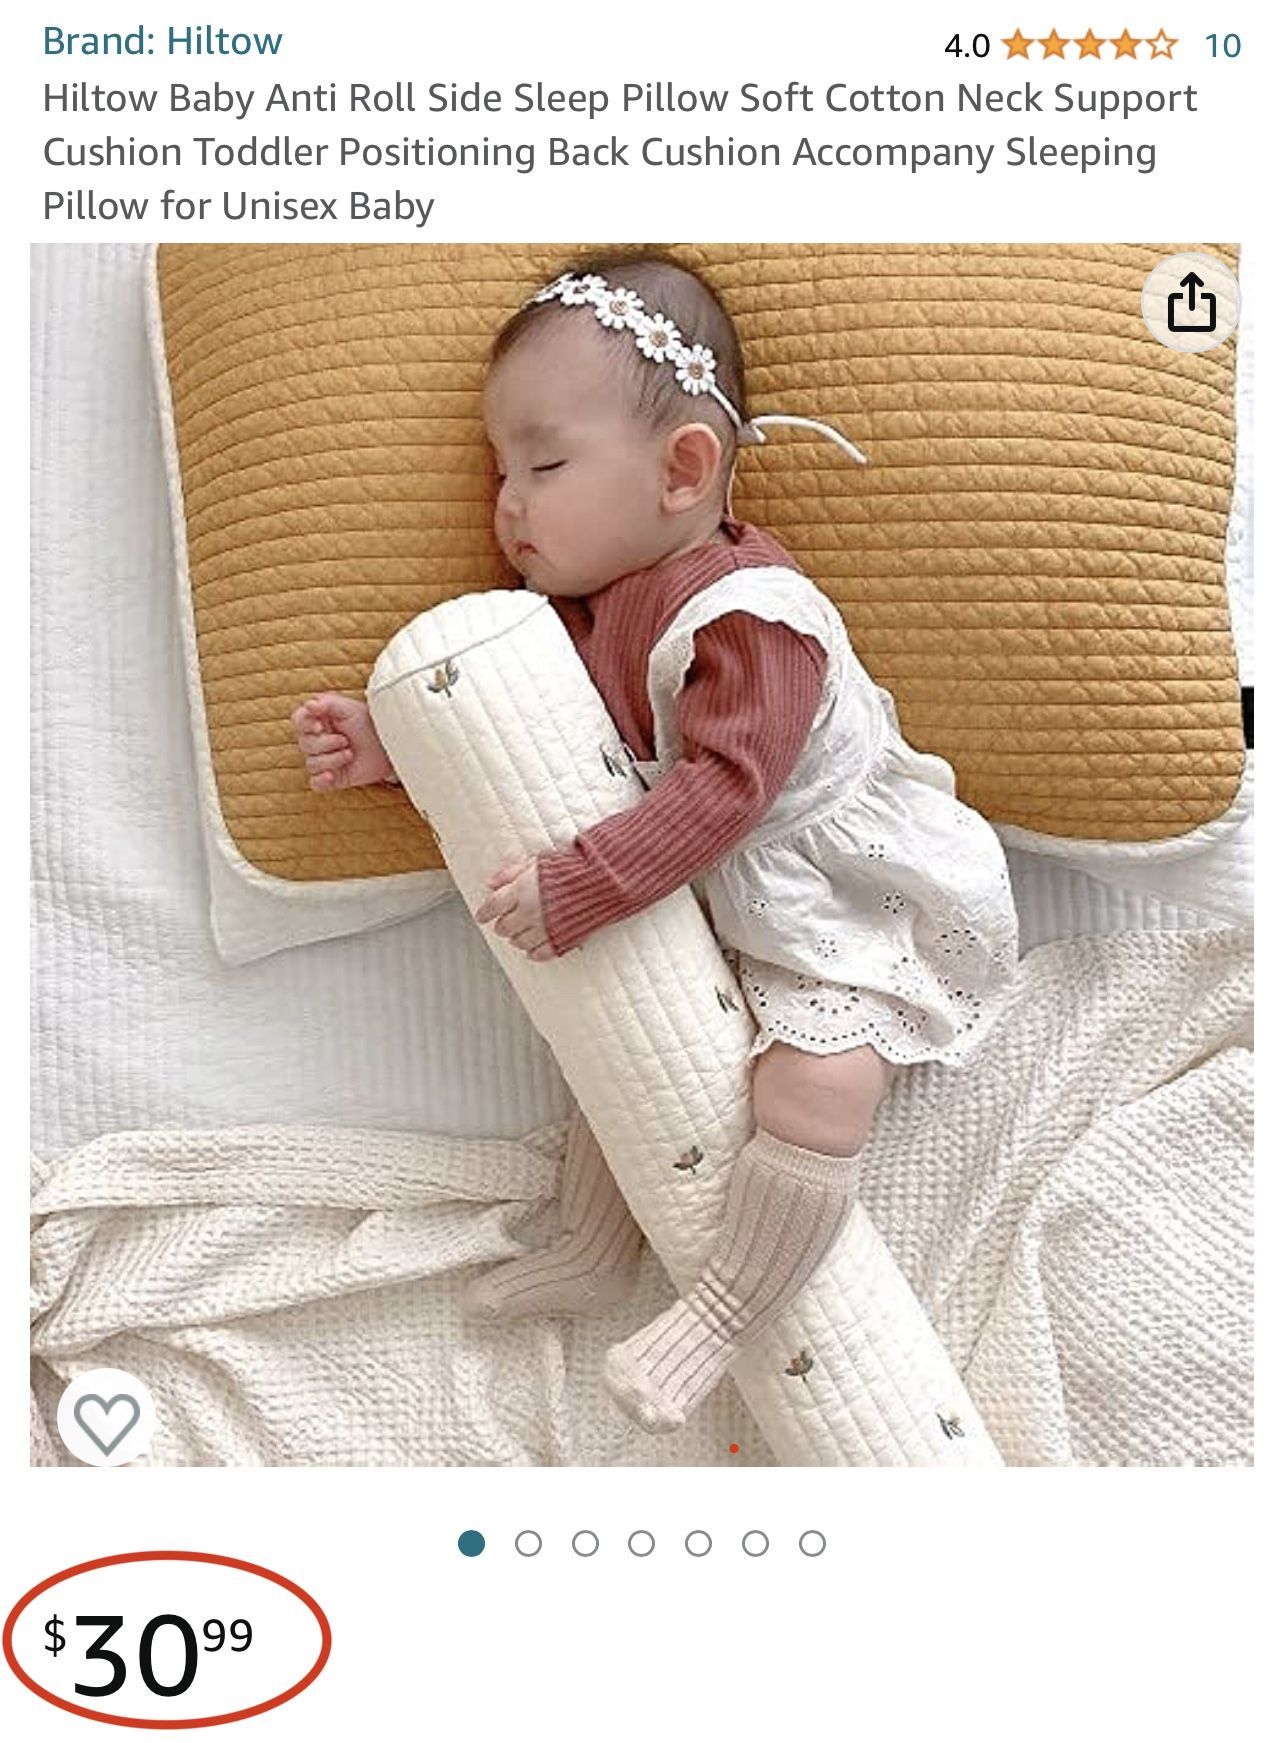 Baby Anti Roll Side Sleep Pillow Soft Cotton Neck Support Cushion Toddler Positioning Back Cushion Accompany Sleeping Pillow for Unisex Baby